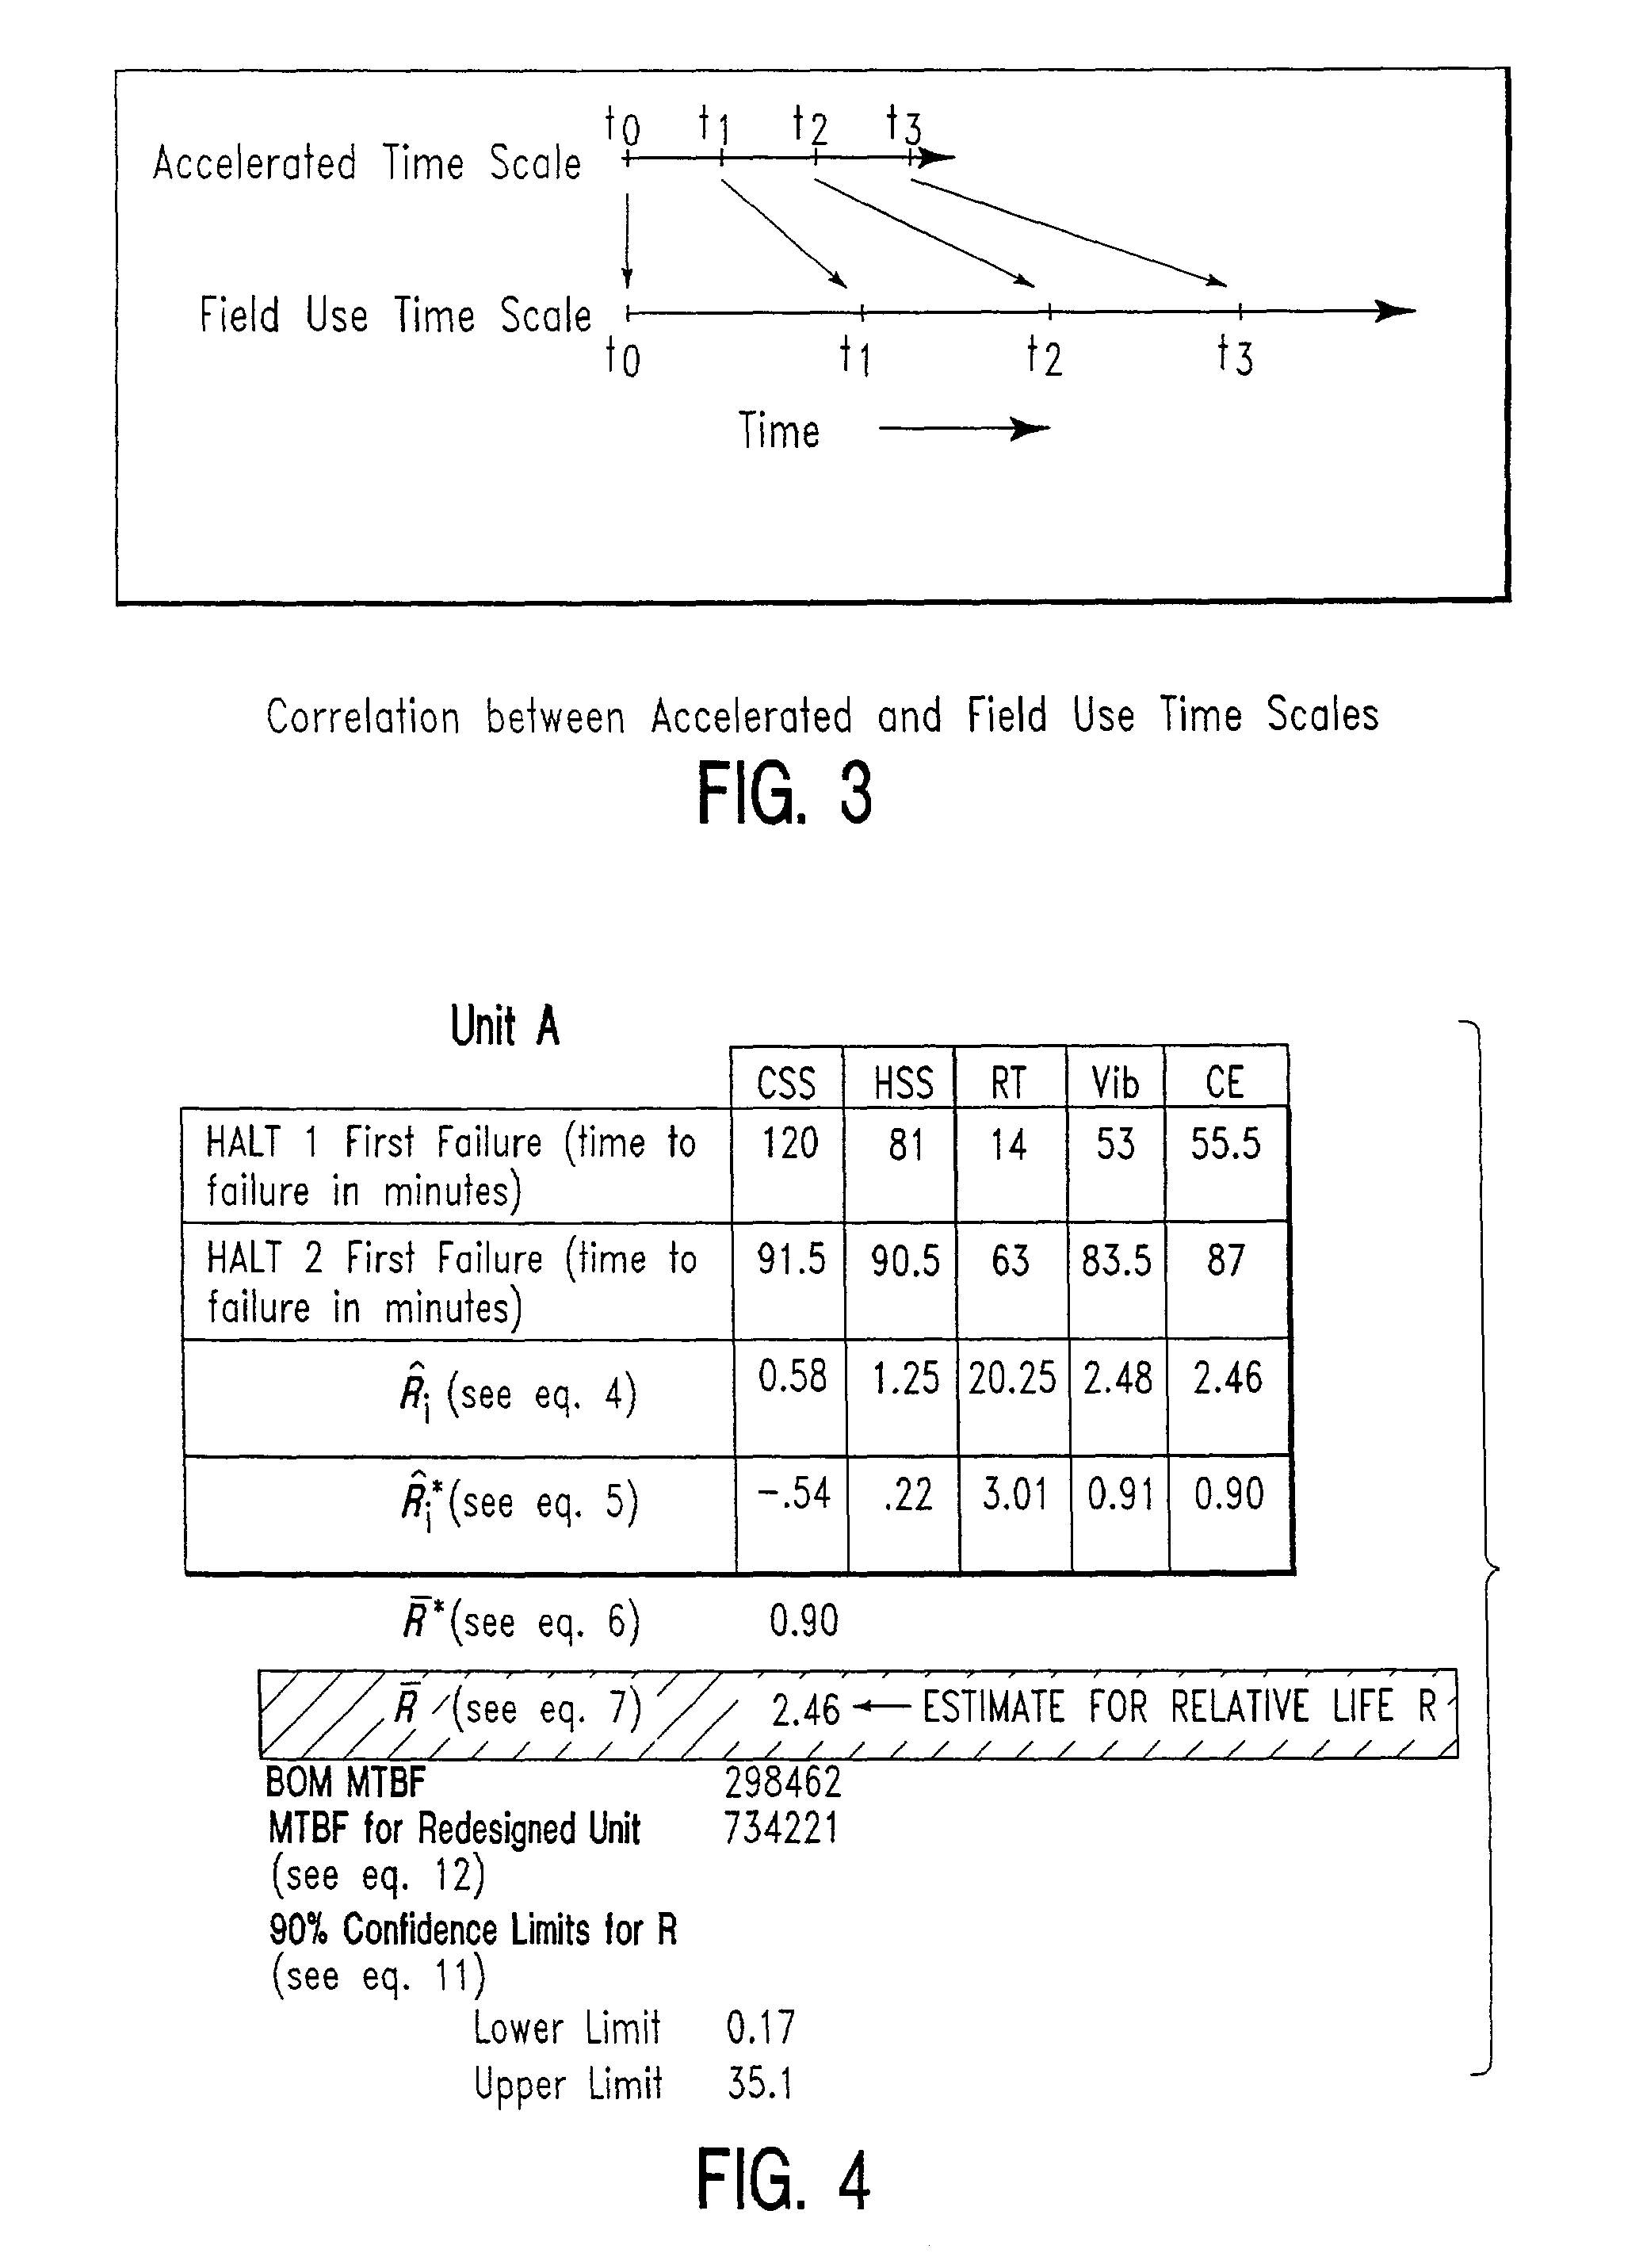 Method for estimating changes in product life resulting from HALT using quadratic acceleration model